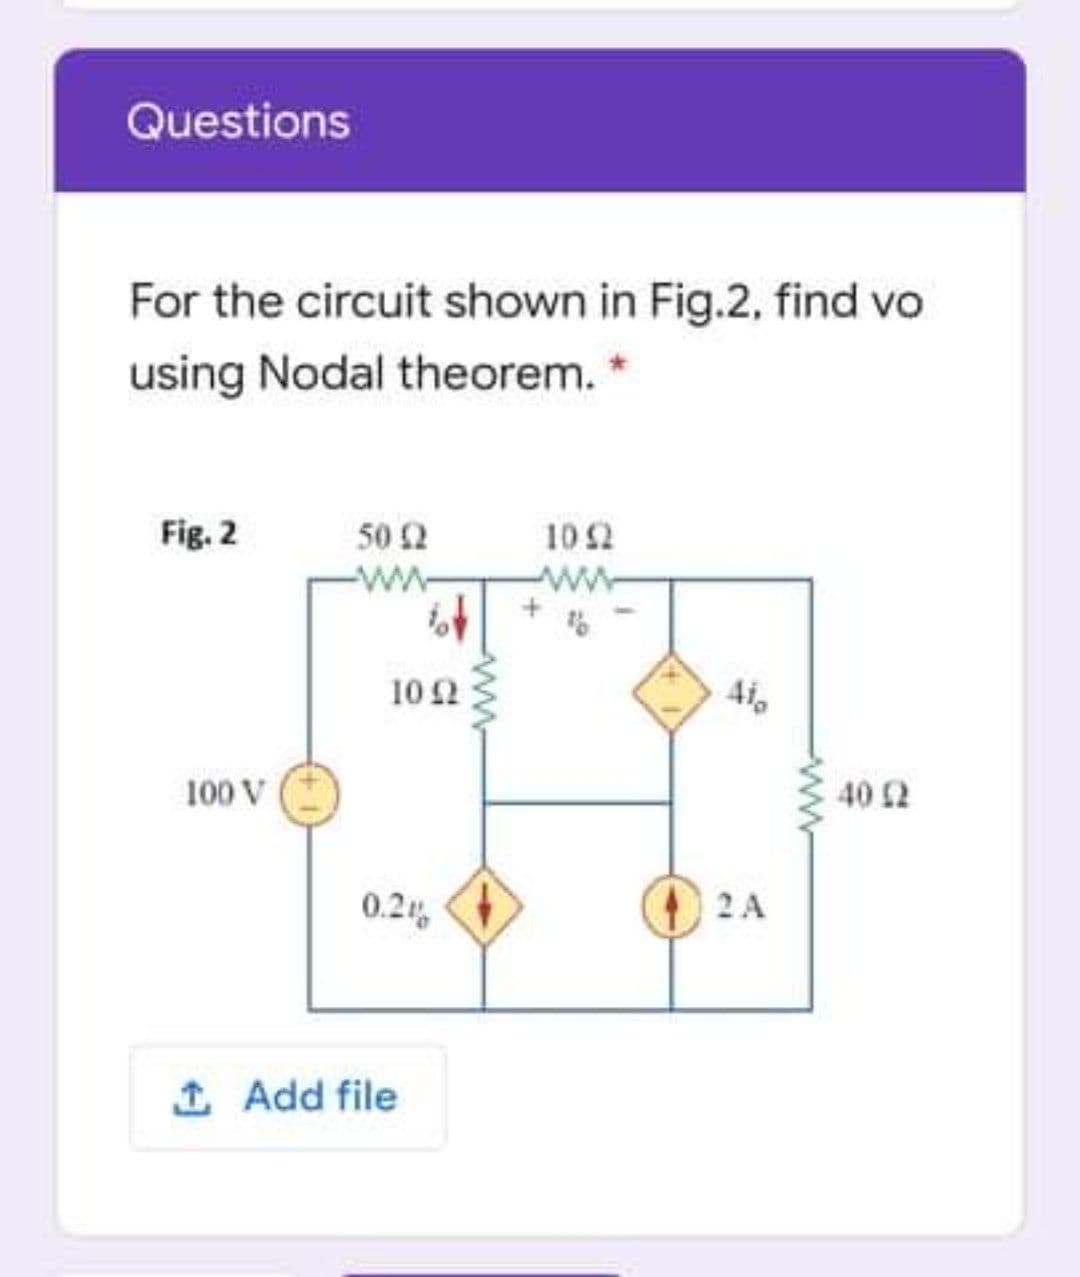 Questions
For the circuit shown in Fig.2, find vo
using Nodal theorem. *
Fig. 2
50 2
10 2
-ww
ww
102
4i
100 V
40 2
0.2
2 A
1 Add file
Aww
